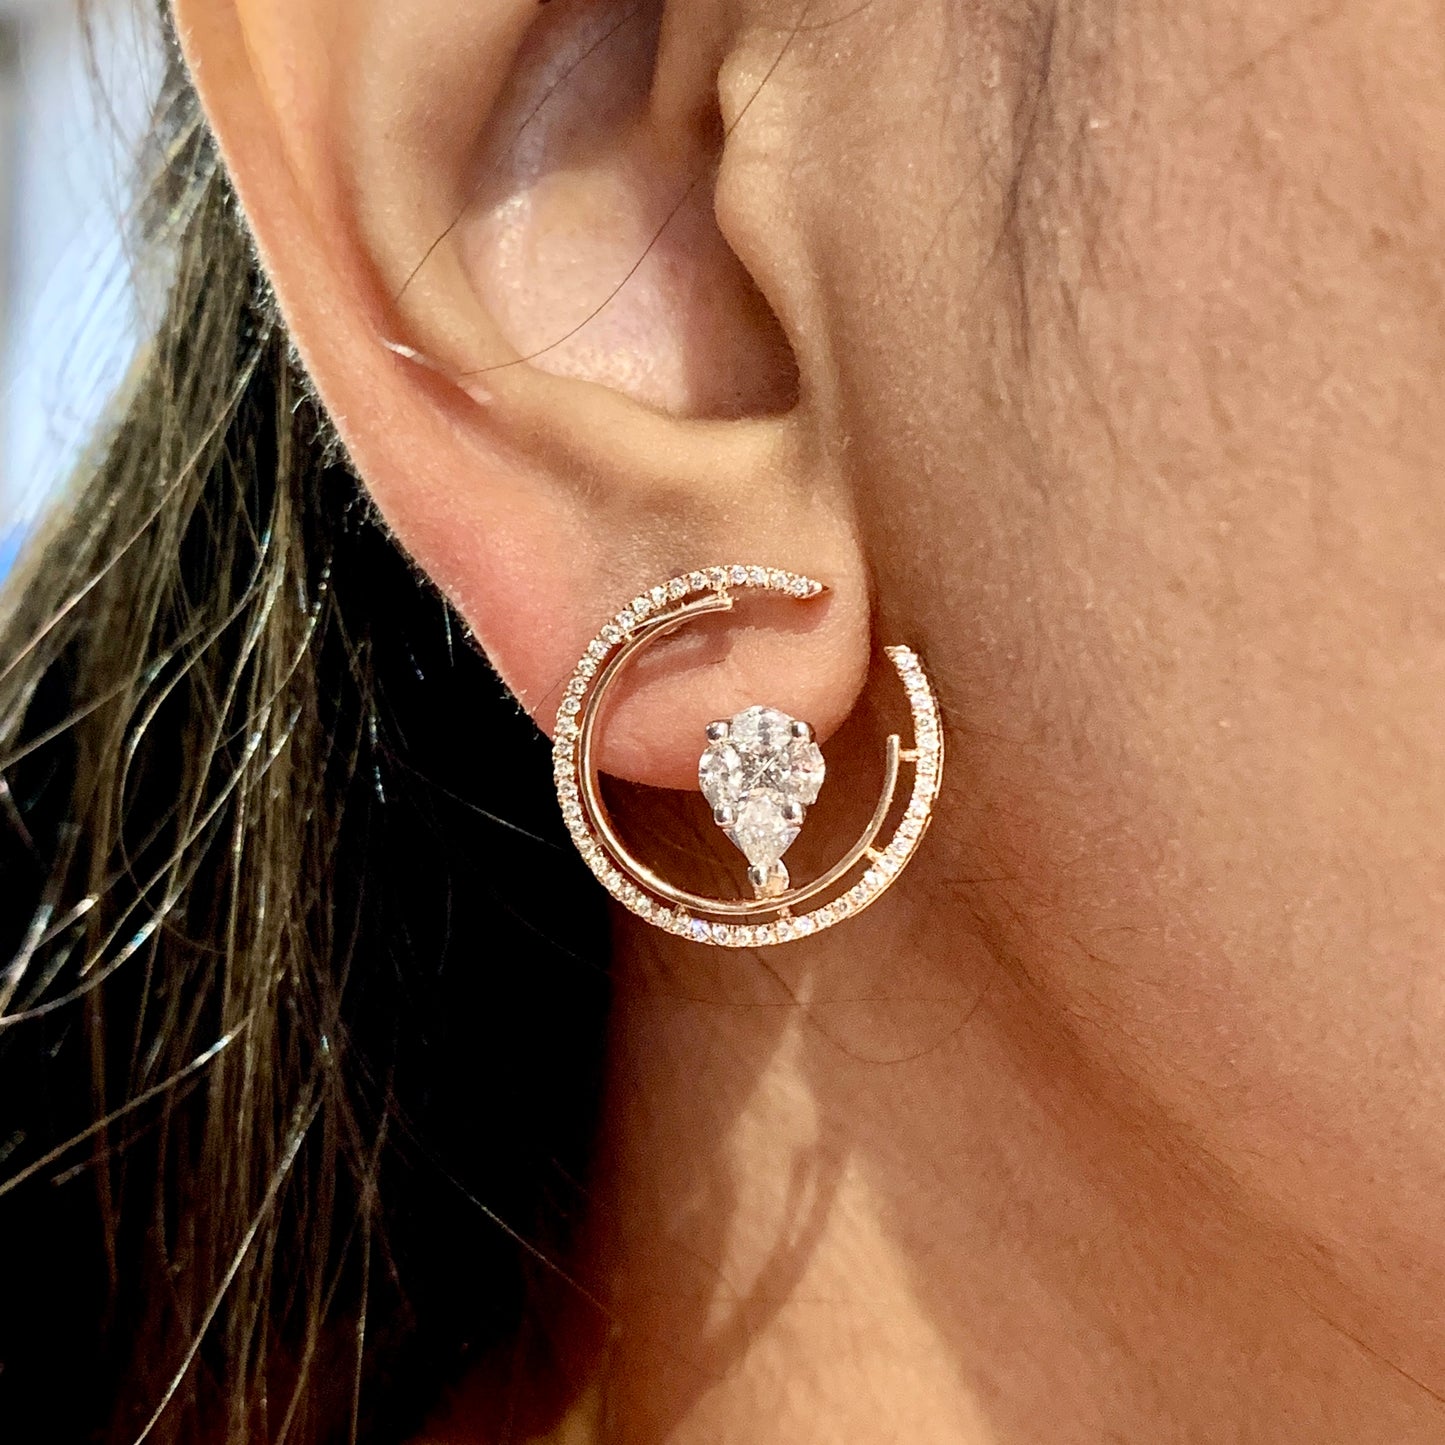 Charismatic solitaire earrings